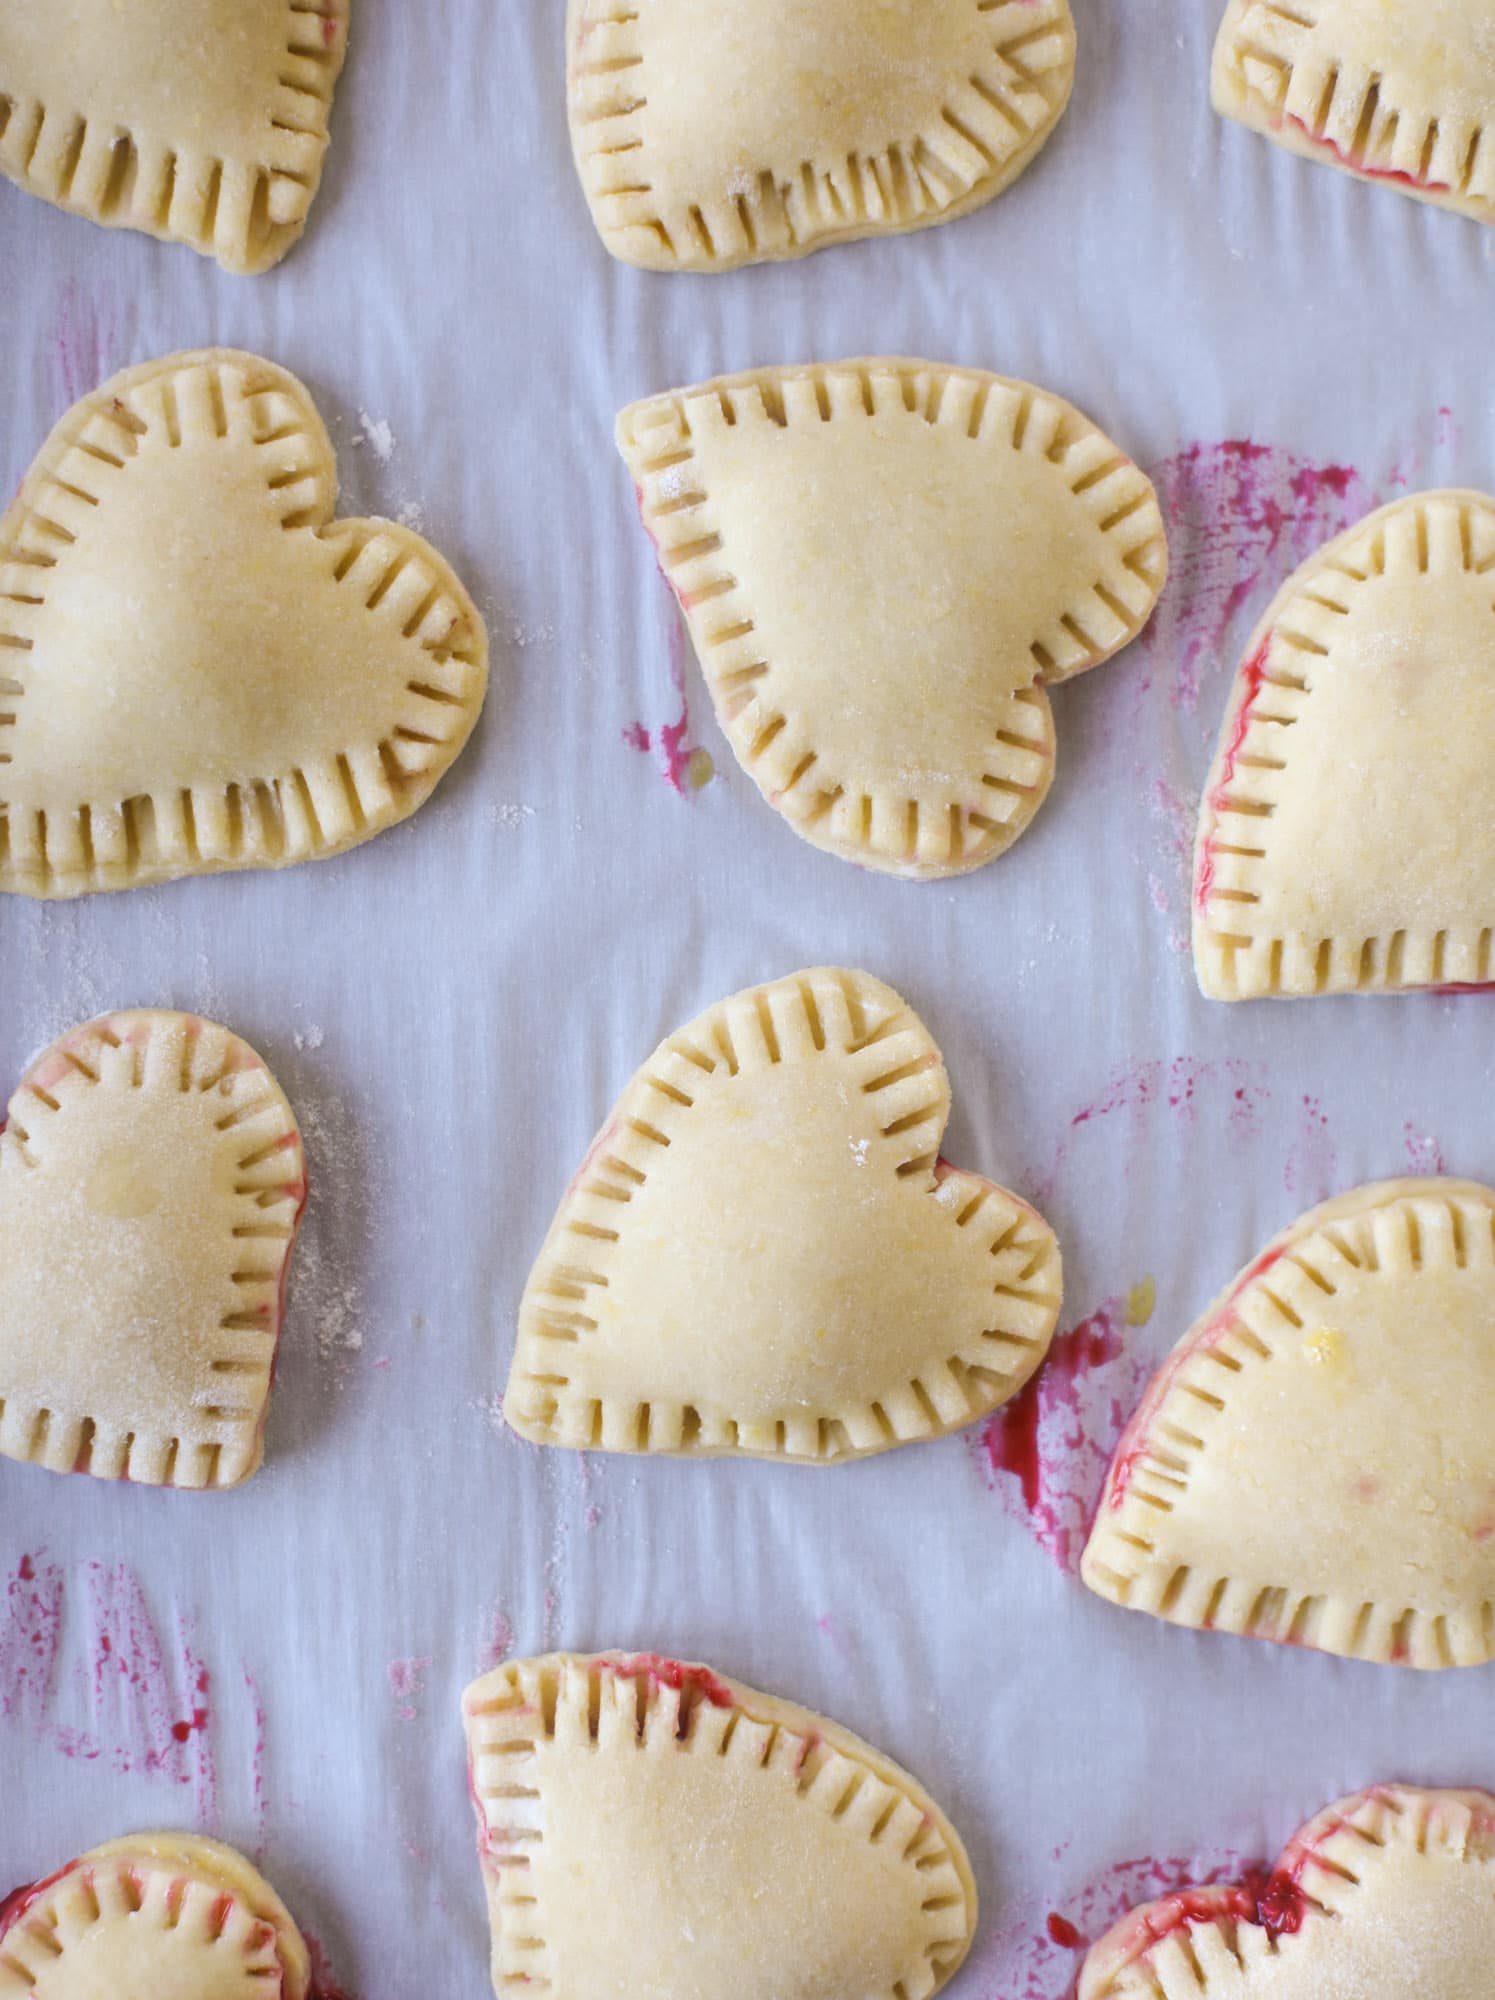 These adorable mini heart pies are filled with a homemade raspberry compote and creamy, chocolatey nutella. So fun and easy to make! I howsweeteats.com #heart #pie